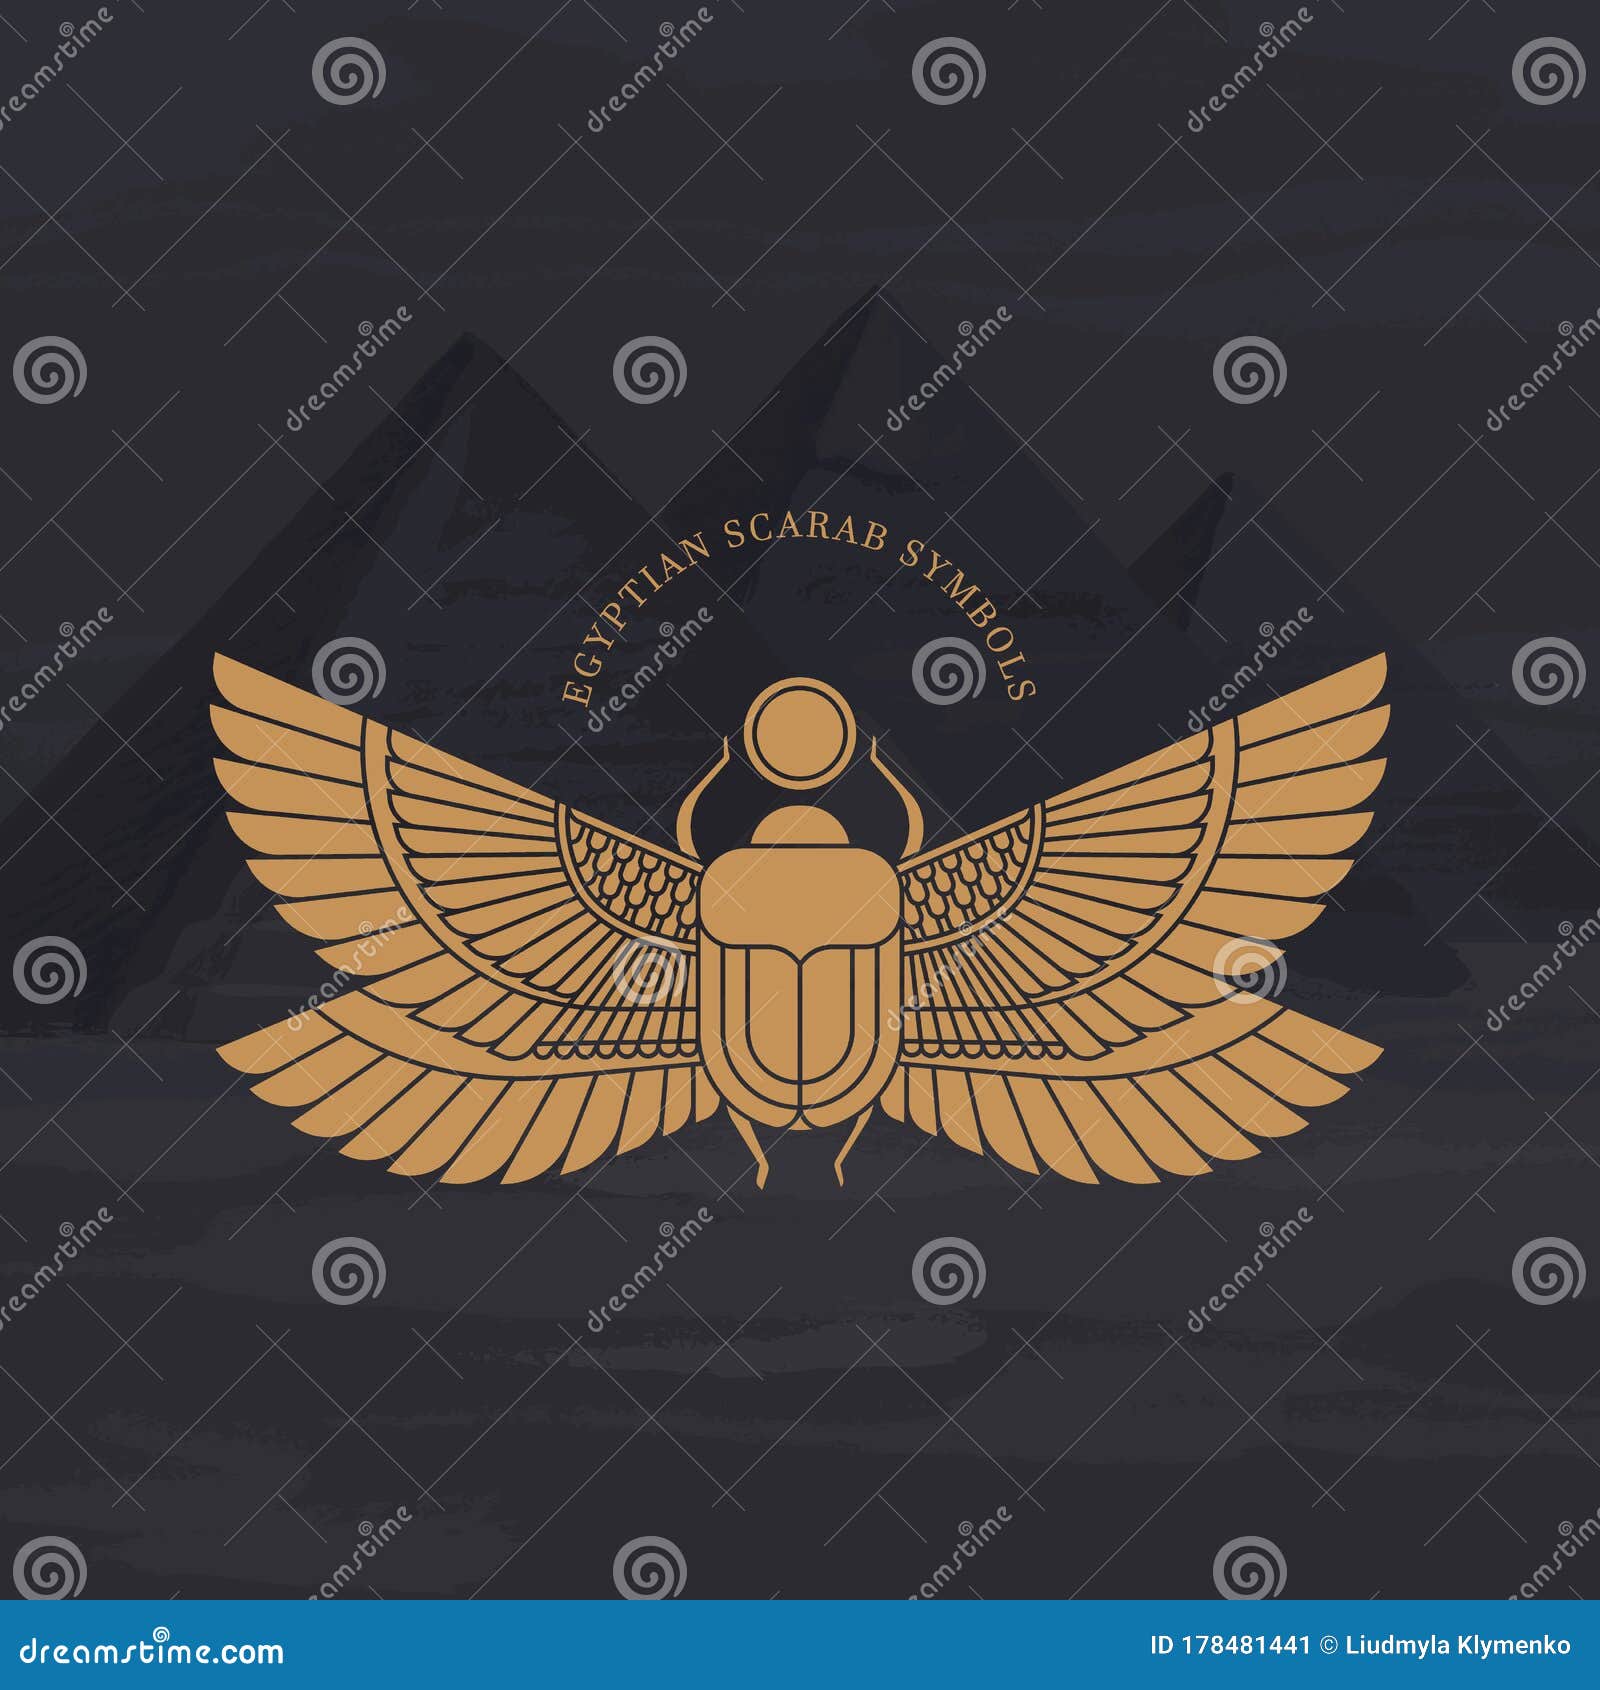 Vector Illustration of the Egyptian Scarab Beetle, Personifying the God ...